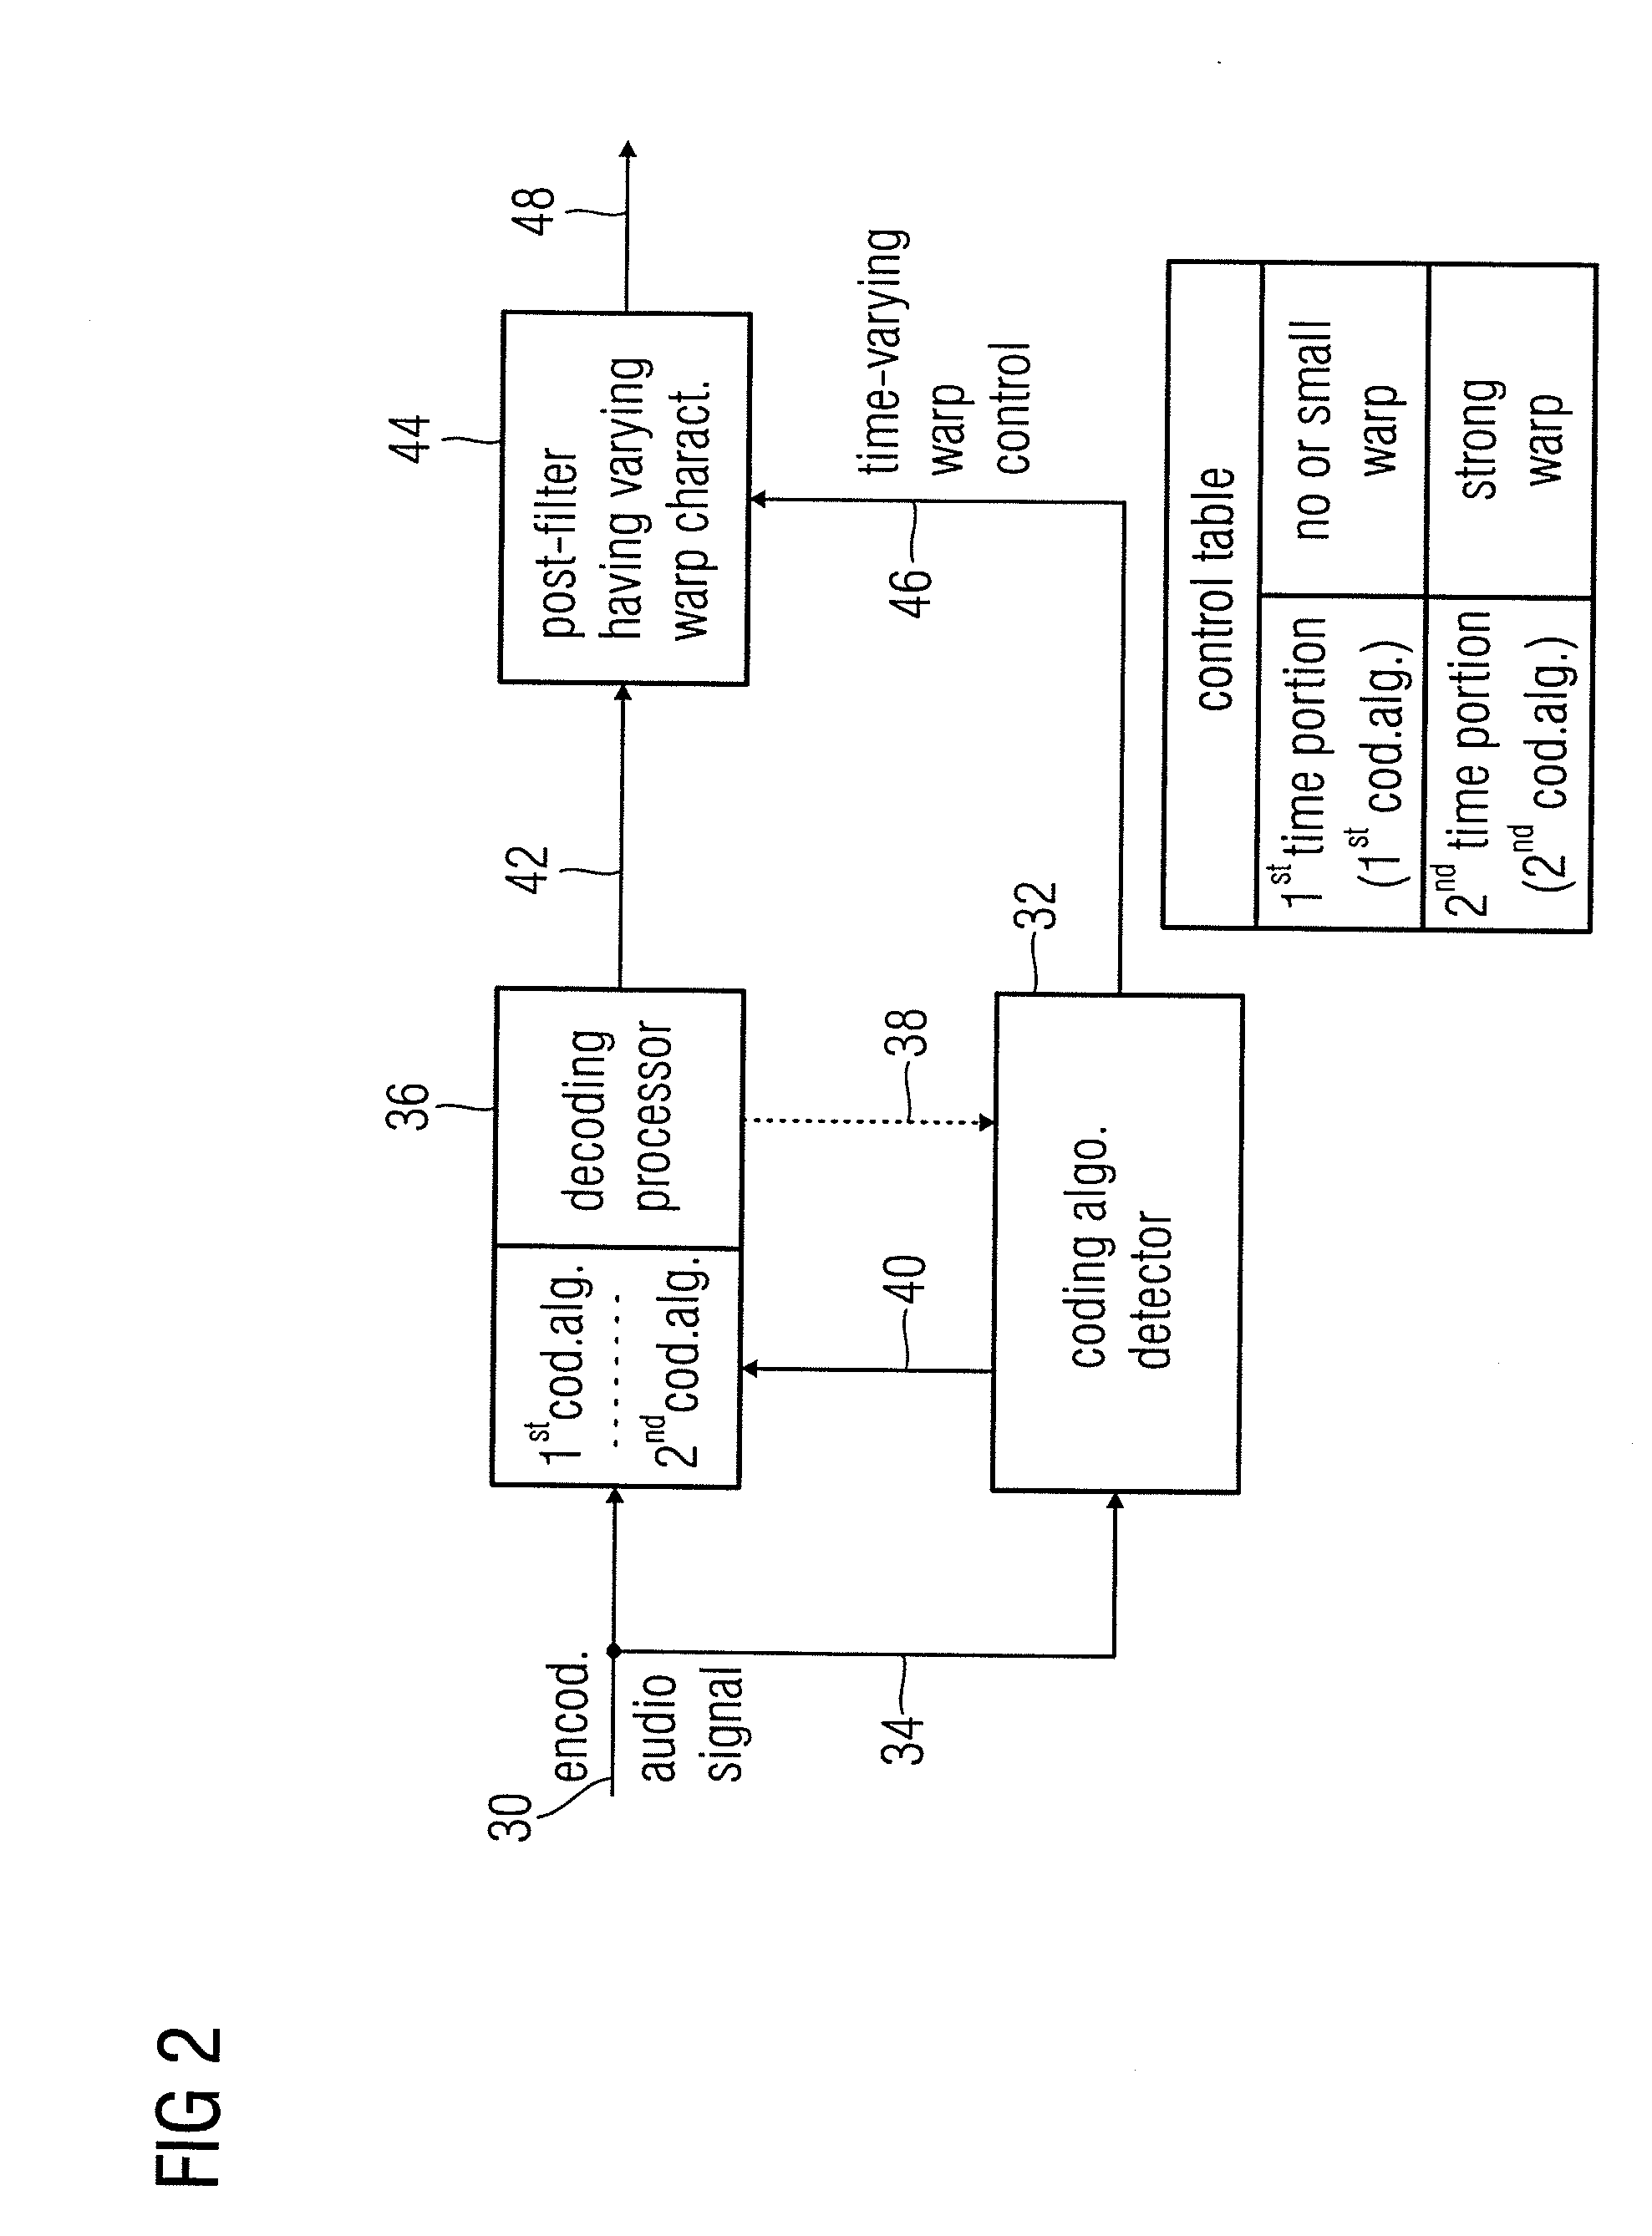 Audio Encoder, Audio Decoder and Audio Processor Having a Dynamically Variable Warping Characteristic